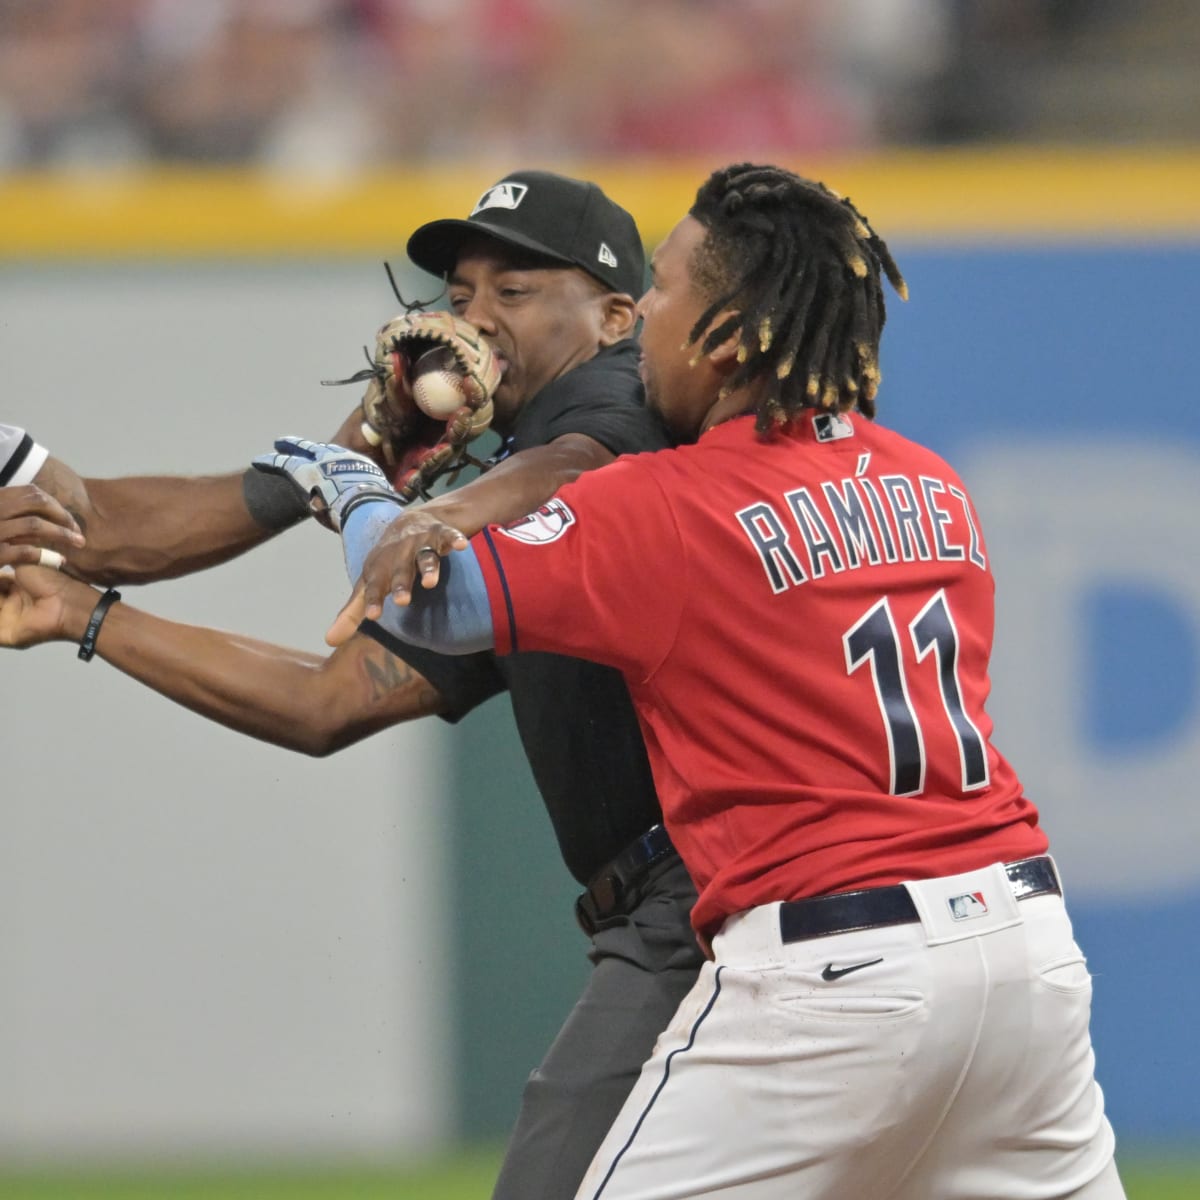 Jose Ramirez Speaks Out After Altercation With Tim Anderson